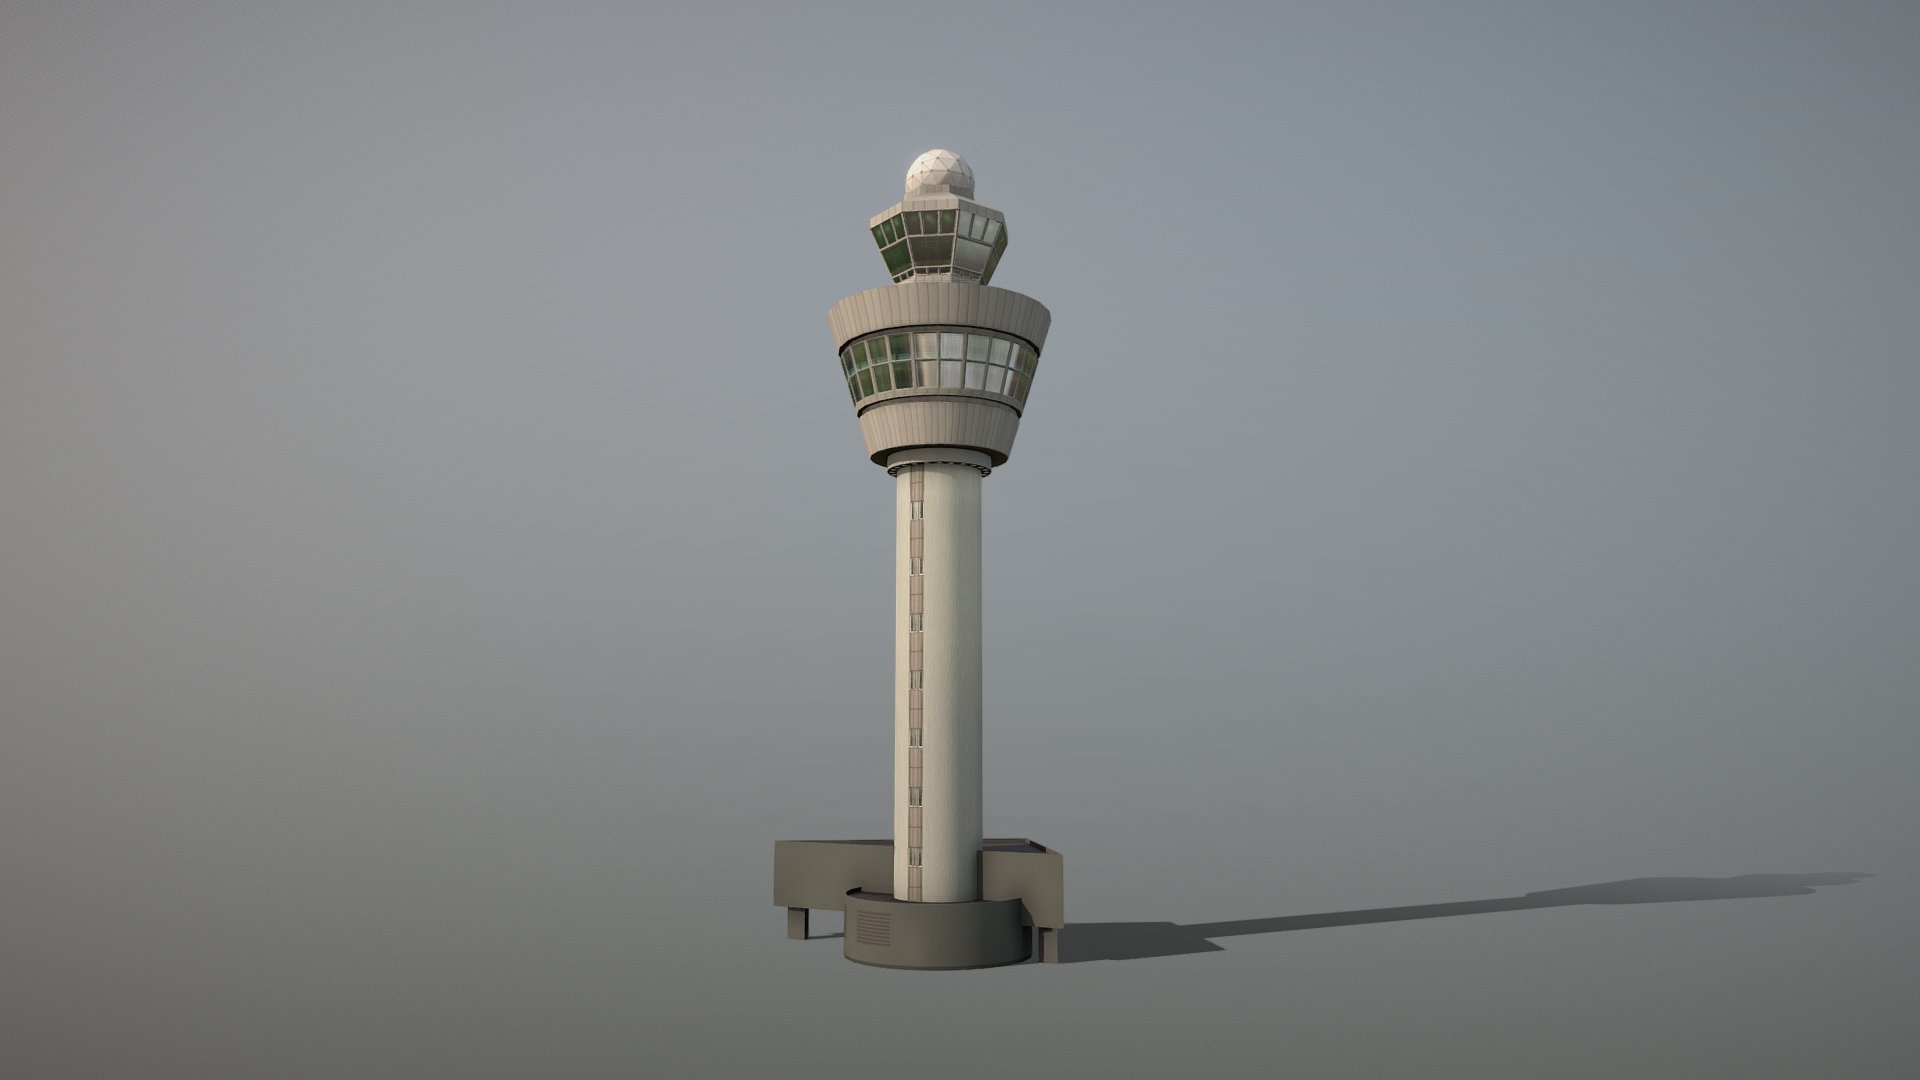 Airport EHAM_Control_Tower Amsterdam Airport Schiphol




LOD0 - (triangles 1242) / (points 650)

LOD1 - (triangles 842) / (points 448)

LOD2 - (triangles 460) / (points 282)

LOD3 - (triangles 124) / (points 89)

Low-poly 3D model Airport Control Tower with LODs




Textures for PBR shader (Albedo, AmbietOcclusion, Gloss, Specular, NormalMap, Emission) they may be used with Unity3D, Unreal Engine. 

All pictures (previews) REALTIME rendering

Textures for NIGHT

Textures for WINTER


Сontains 4 LODs




Textures:




EHAM_Control_Tower_Albedo.png         - 2048x2048

EHAM_Control_Tower_AmbietOcclusion.png    - 2048x2048

EHAM_Control_Tower_Gloss.png          - 2048x2048

EHAM_Control_Tower_Specular.png       - 2048x2048

EHAM_Control_Tower_NormalMap.png      - 2048x2048 


EHAM_Control_Tower_Emission.png       - 2048x2048




Pack for WINTER   





If you have questions about my models or need any kind of help, feel free to contact me and i'll do my best to help you 3d model